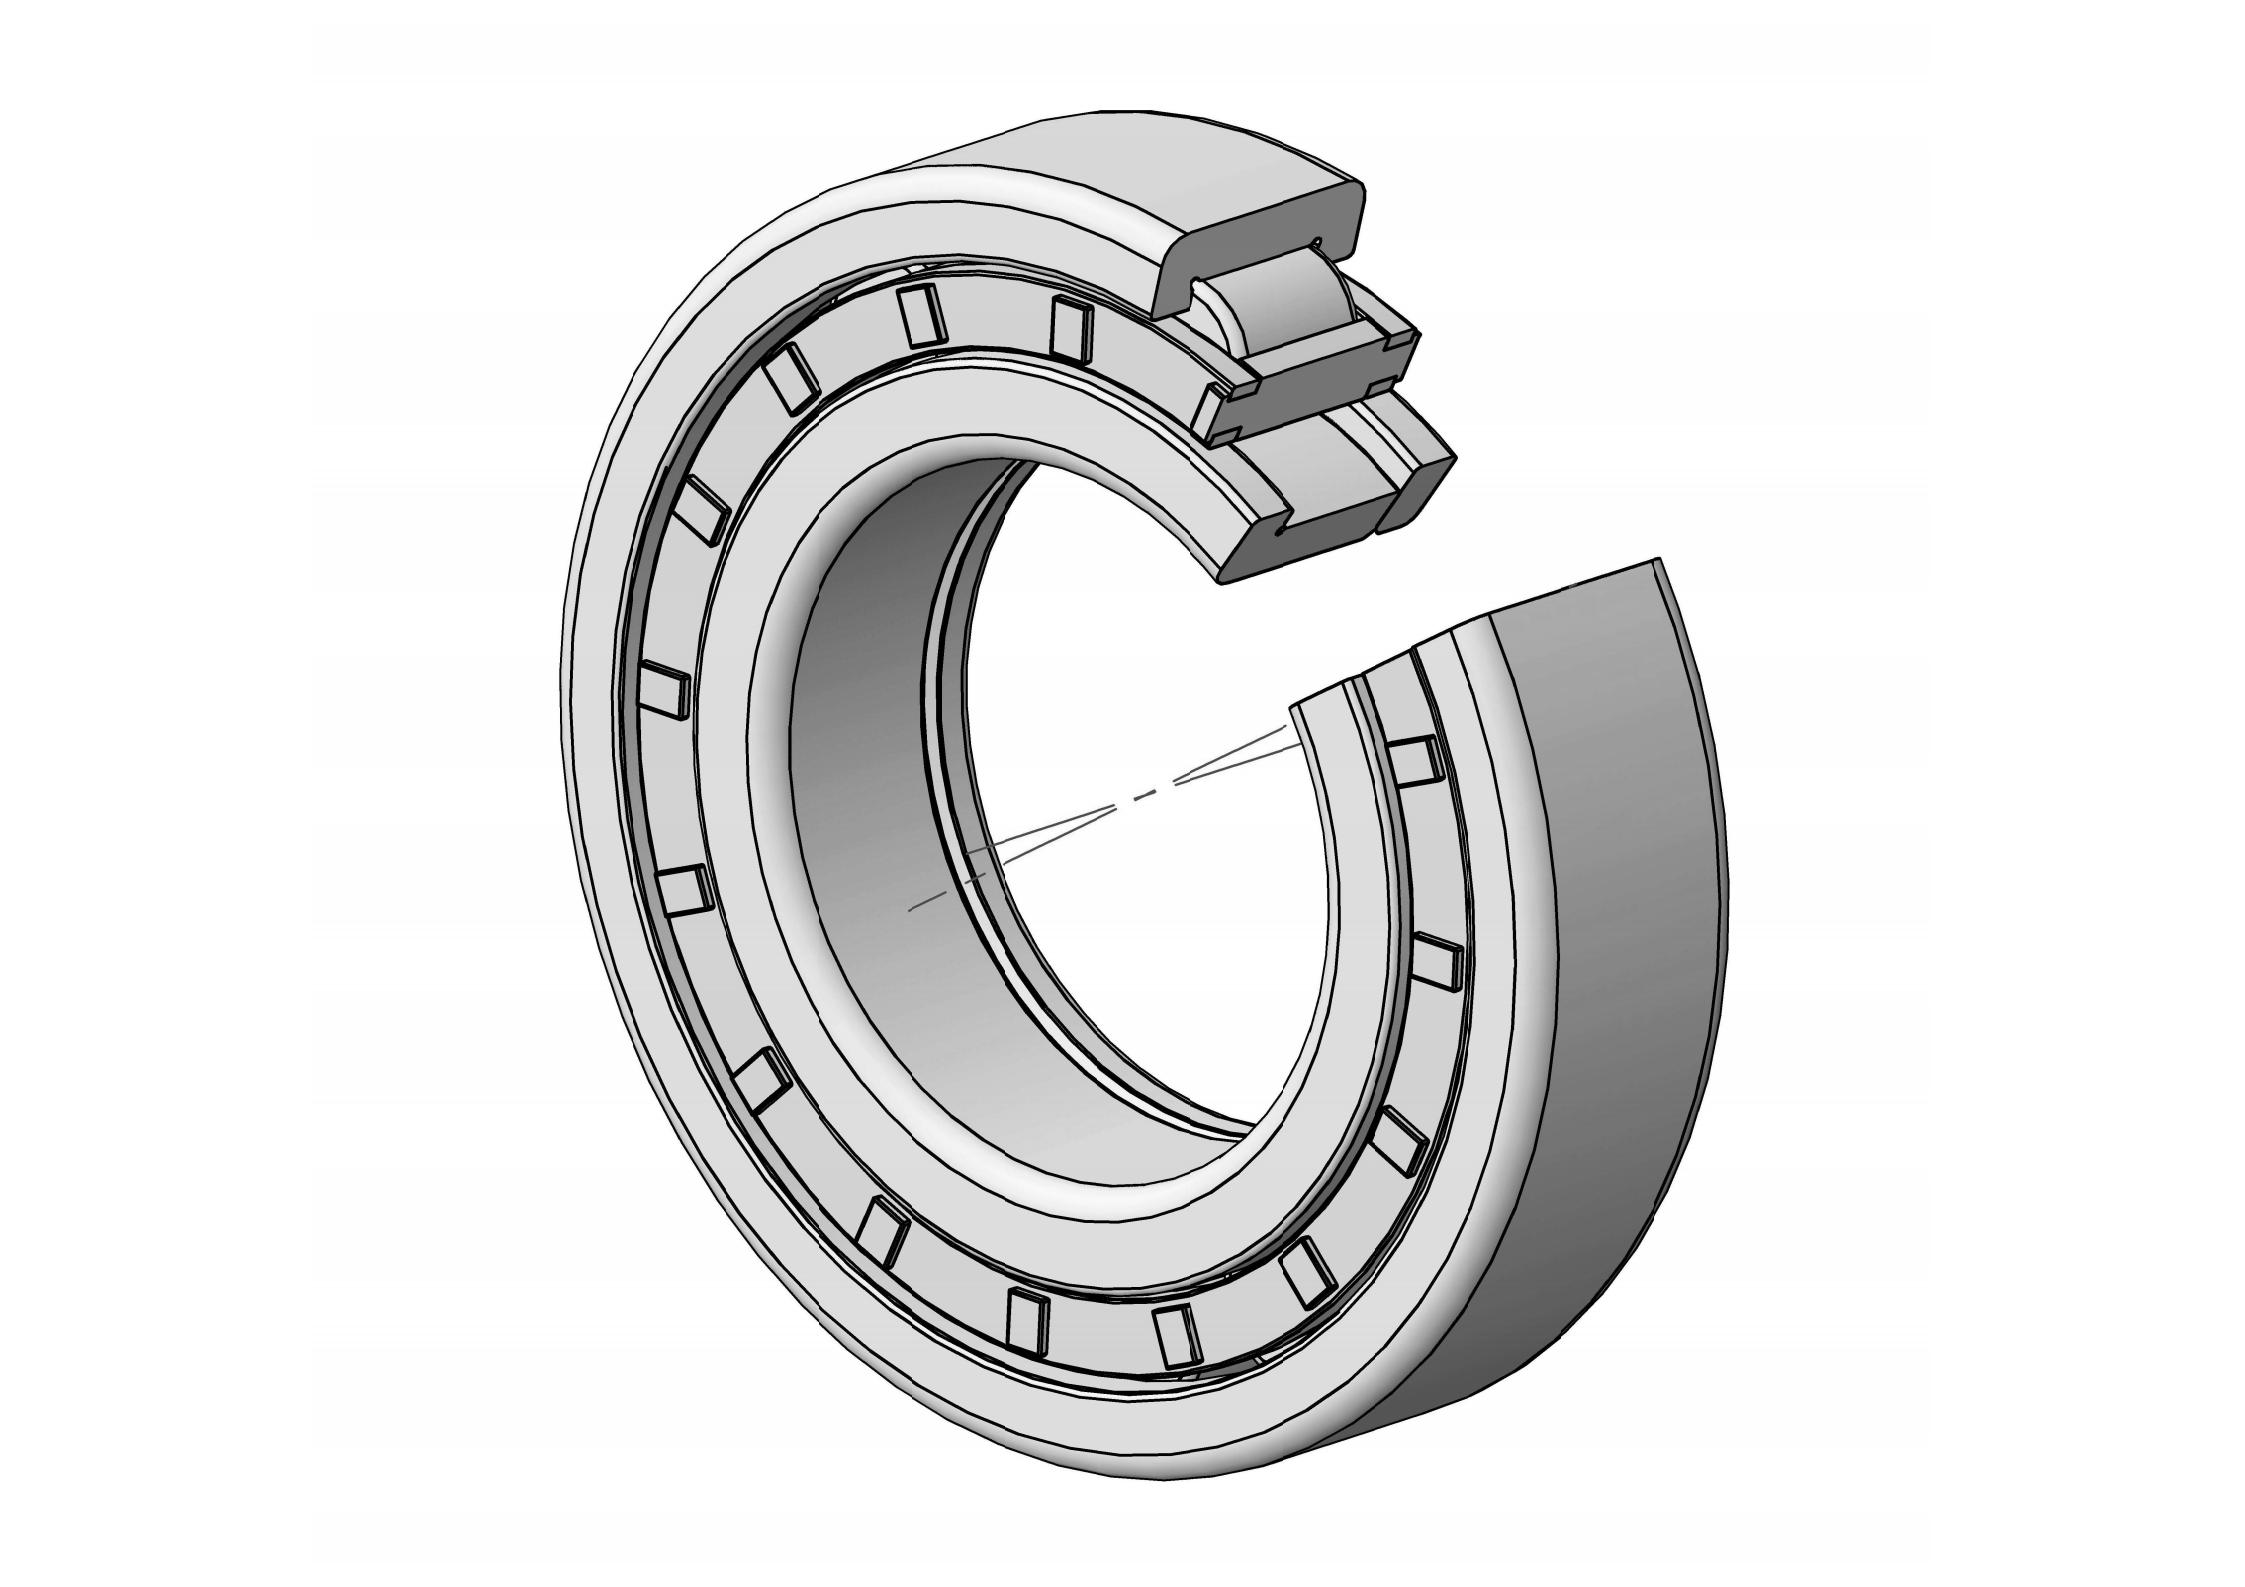 NUP226-EM Single Row Cylindrical roller bearing 